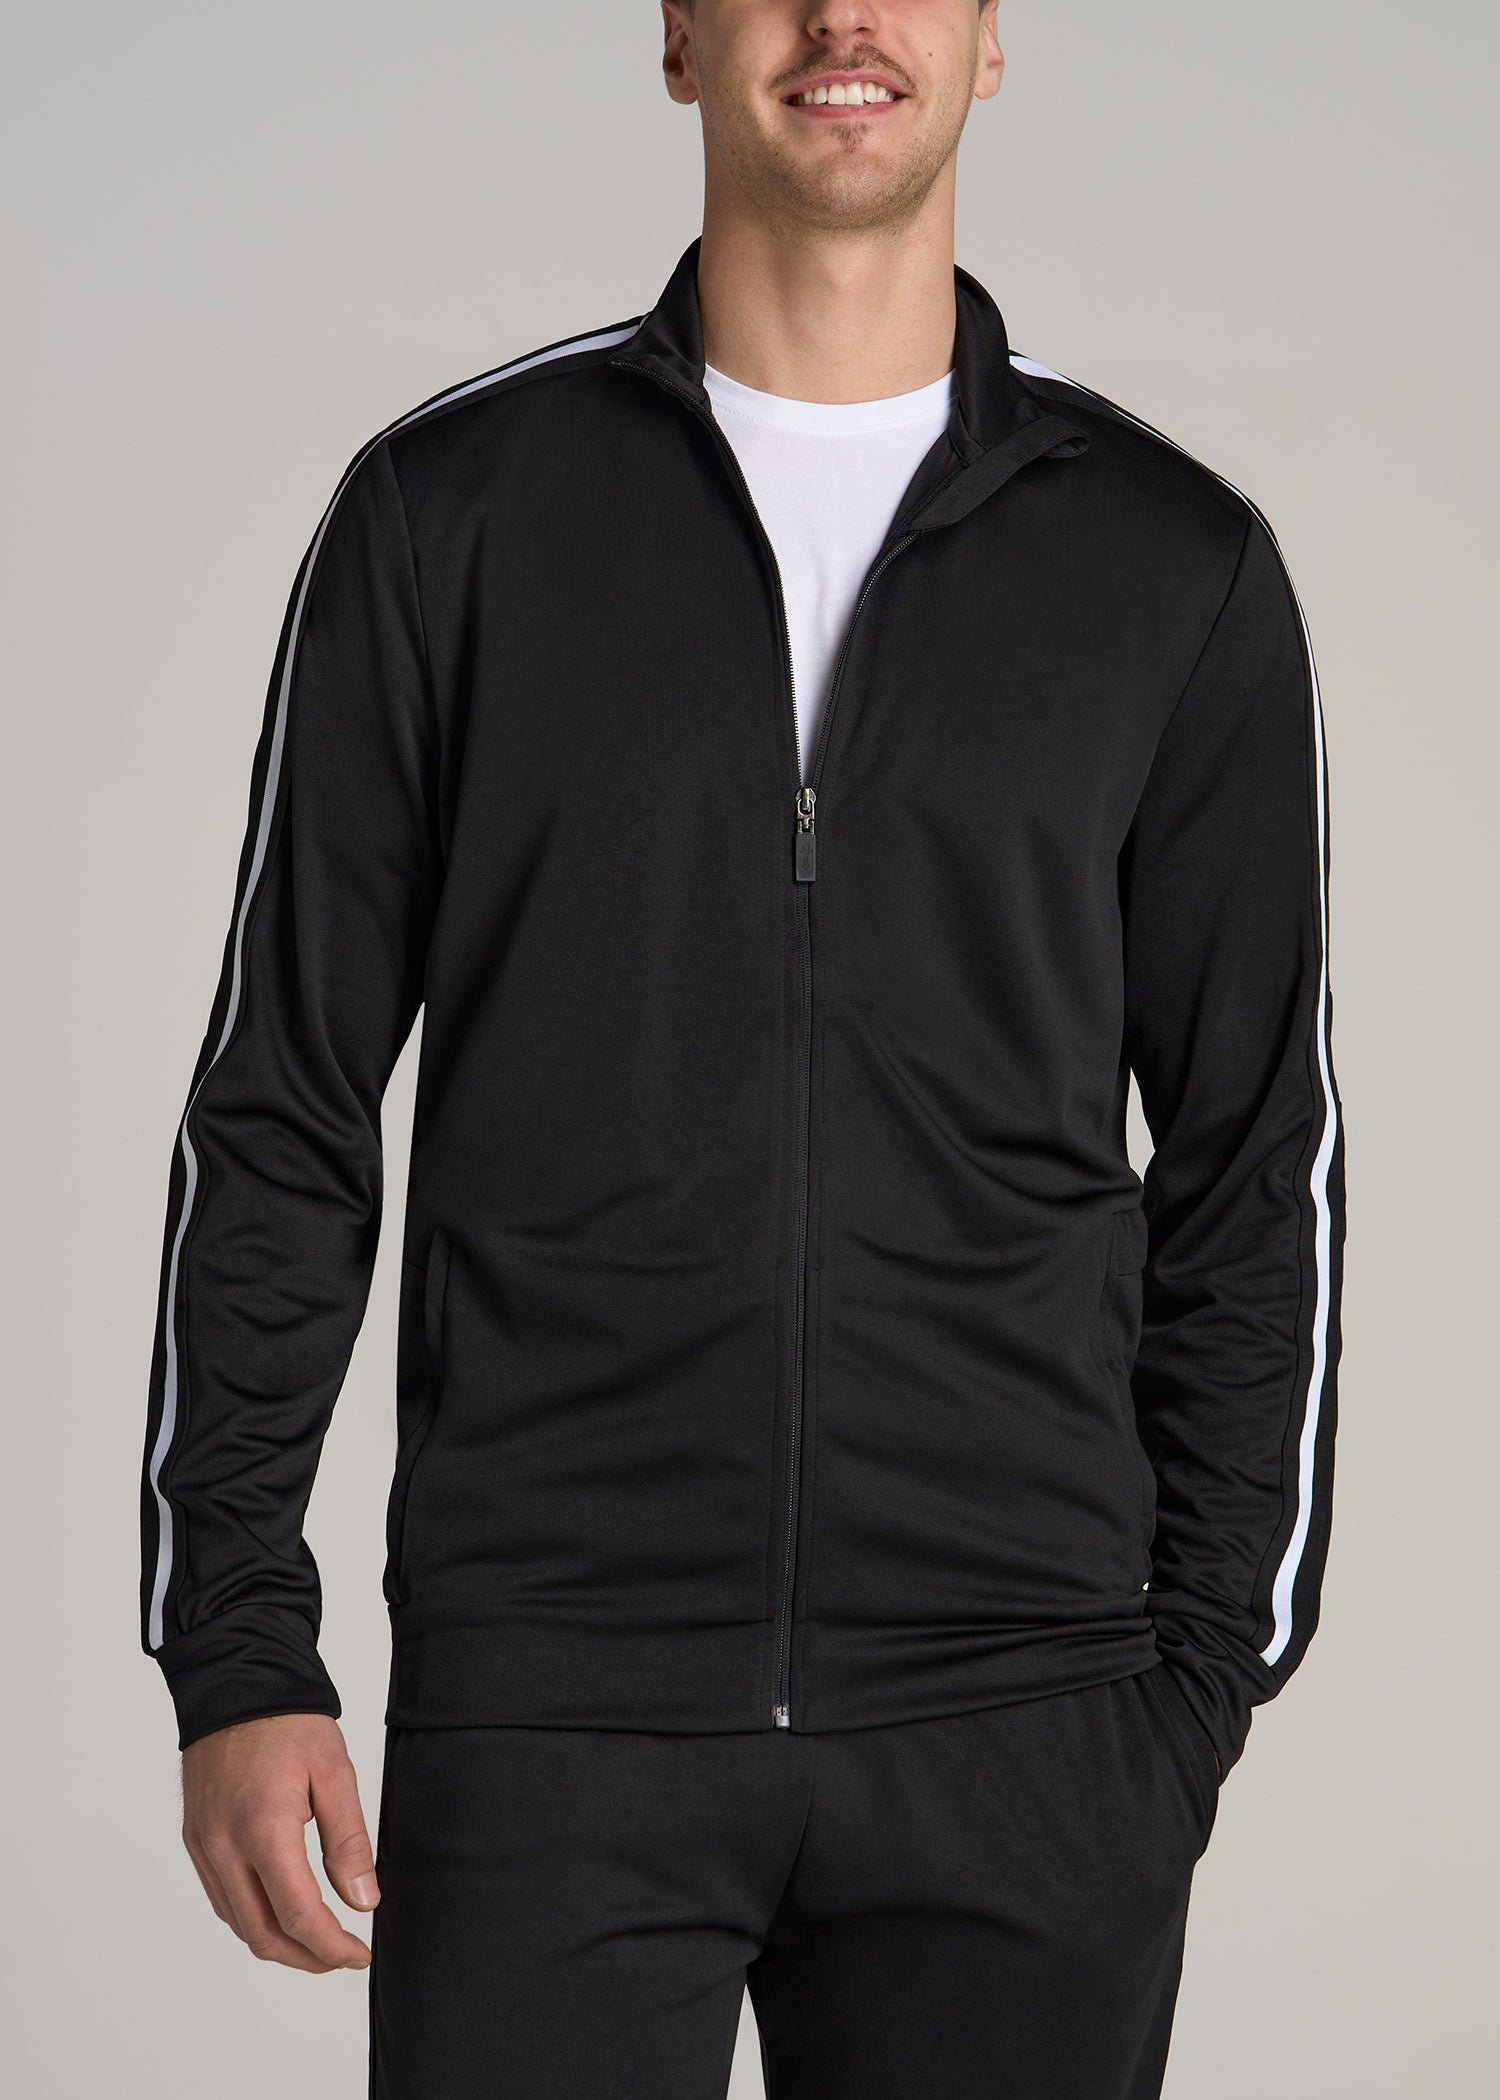 Tall Men's Athletic Black Jacket With White Stripes